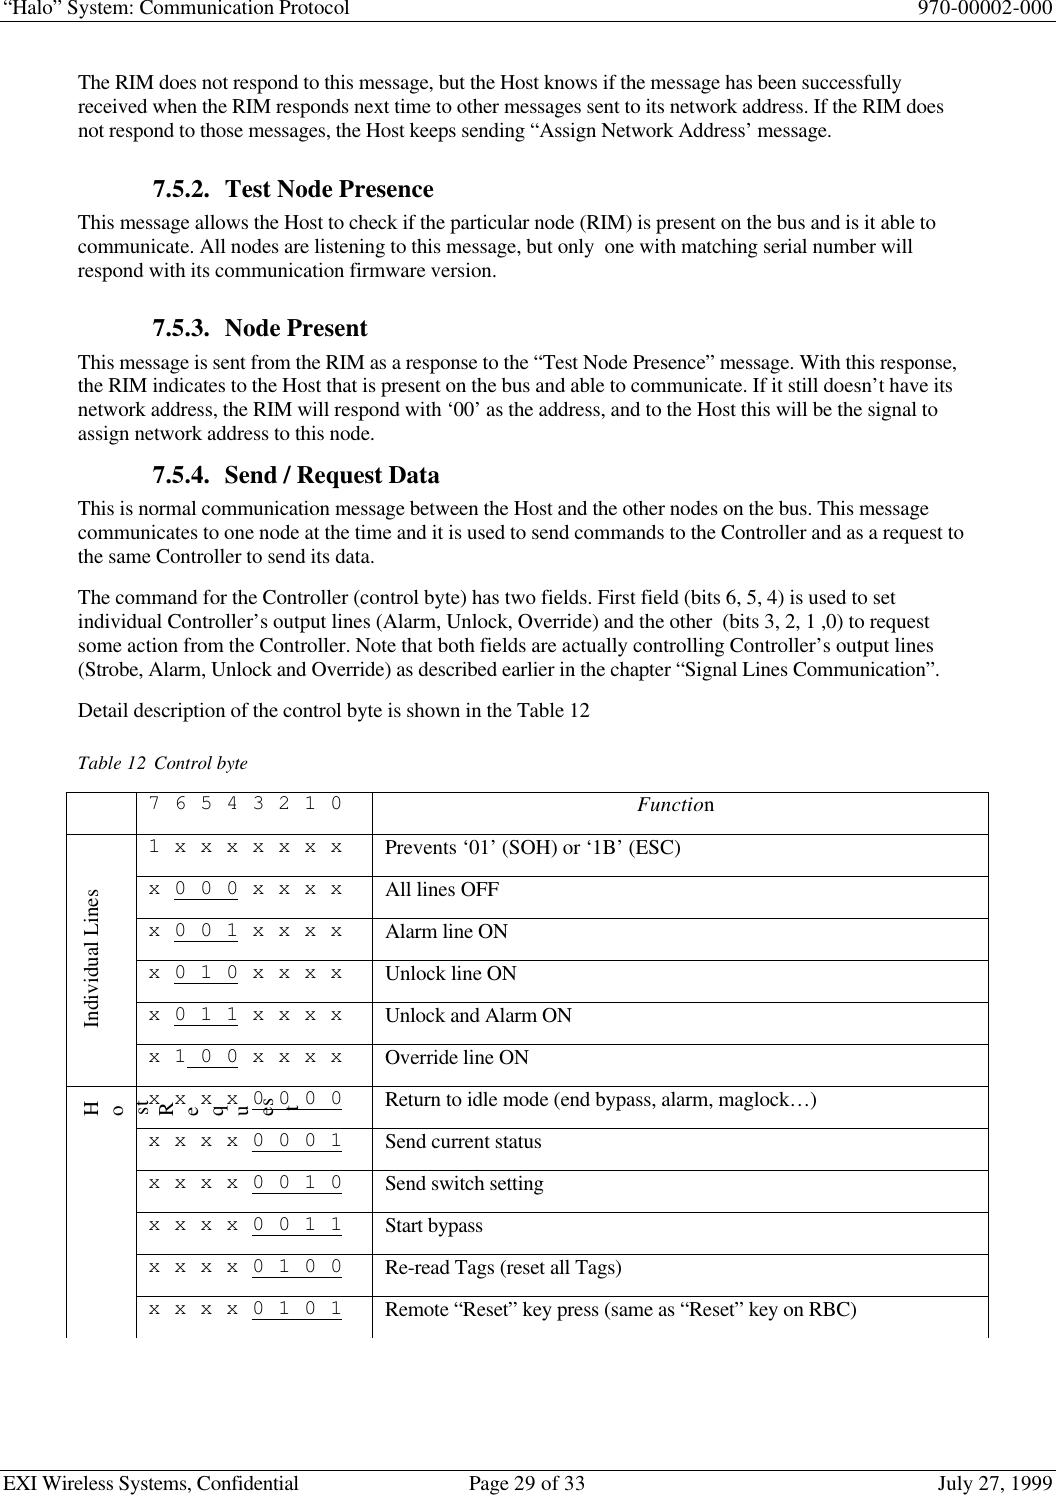 “Halo” System: Communication Protocol 970-00002-000EXI Wireless Systems, Confidential Page 29 of 33 July 27, 1999The RIM does not respond to this message, but the Host knows if the message has been successfullyreceived when the RIM responds next time to other messages sent to its network address. If the RIM doesnot respond to those messages, the Host keeps sending “Assign Network Address’ message.7.5.2. Test Node PresenceThis message allows the Host to check if the particular node (RIM) is present on the bus and is it able tocommunicate. All nodes are listening to this message, but only  one with matching serial number willrespond with its communication firmware version.7.5.3. Node PresentThis message is sent from the RIM as a response to the “Test Node Presence” message. With this response,the RIM indicates to the Host that is present on the bus and able to communicate. If it still doesn’t have itsnetwork address, the RIM will respond with ‘00’ as the address, and to the Host this will be the signal toassign network address to this node.7.5.4. Send / Request DataThis is normal communication message between the Host and the other nodes on the bus. This messagecommunicates to one node at the time and it is used to send commands to the Controller and as a request tothe same Controller to send its data.The command for the Controller (control byte) has two fields. First field (bits 6, 5, 4) is used to setindividual Controller’s output lines (Alarm, Unlock, Override) and the other  (bits 3, 2, 1 ,0) to requestsome action from the Controller. Note that both fields are actually controlling Controller’s output lines(Strobe, Alarm, Unlock and Override) as described earlier in the chapter “Signal Lines Communication”.Detail description of the control byte is shown in the Table 12Table 12 Control byte7 6 5 4 3 2 1 0 Function1 x x x x x x x Prevents ‘01’ (SOH) or ‘1B’ (ESC)x 0 0 0 x x x x All lines OFFx 0 0 1 x x x x Alarm line ONx 0 1 0 x x x x Unlock line ONx 0 1 1 x x x x Unlock and Alarm ONIndividual Linesx 1 0 0 x x x x Override line ONx x x x 0 0 0 0 Return to idle mode (end bypass, alarm, maglock…)x x x x 0 0 0 1 Send current statusx x x x 0 0 1 0 Send switch settingx x x x 0 0 1 1 Start bypassx x x x 0 1 0 0 Re-read Tags (reset all Tags)HostRequestx x x x 0 1 0 1 Remote “Reset” key press (same as “Reset” key on RBC)